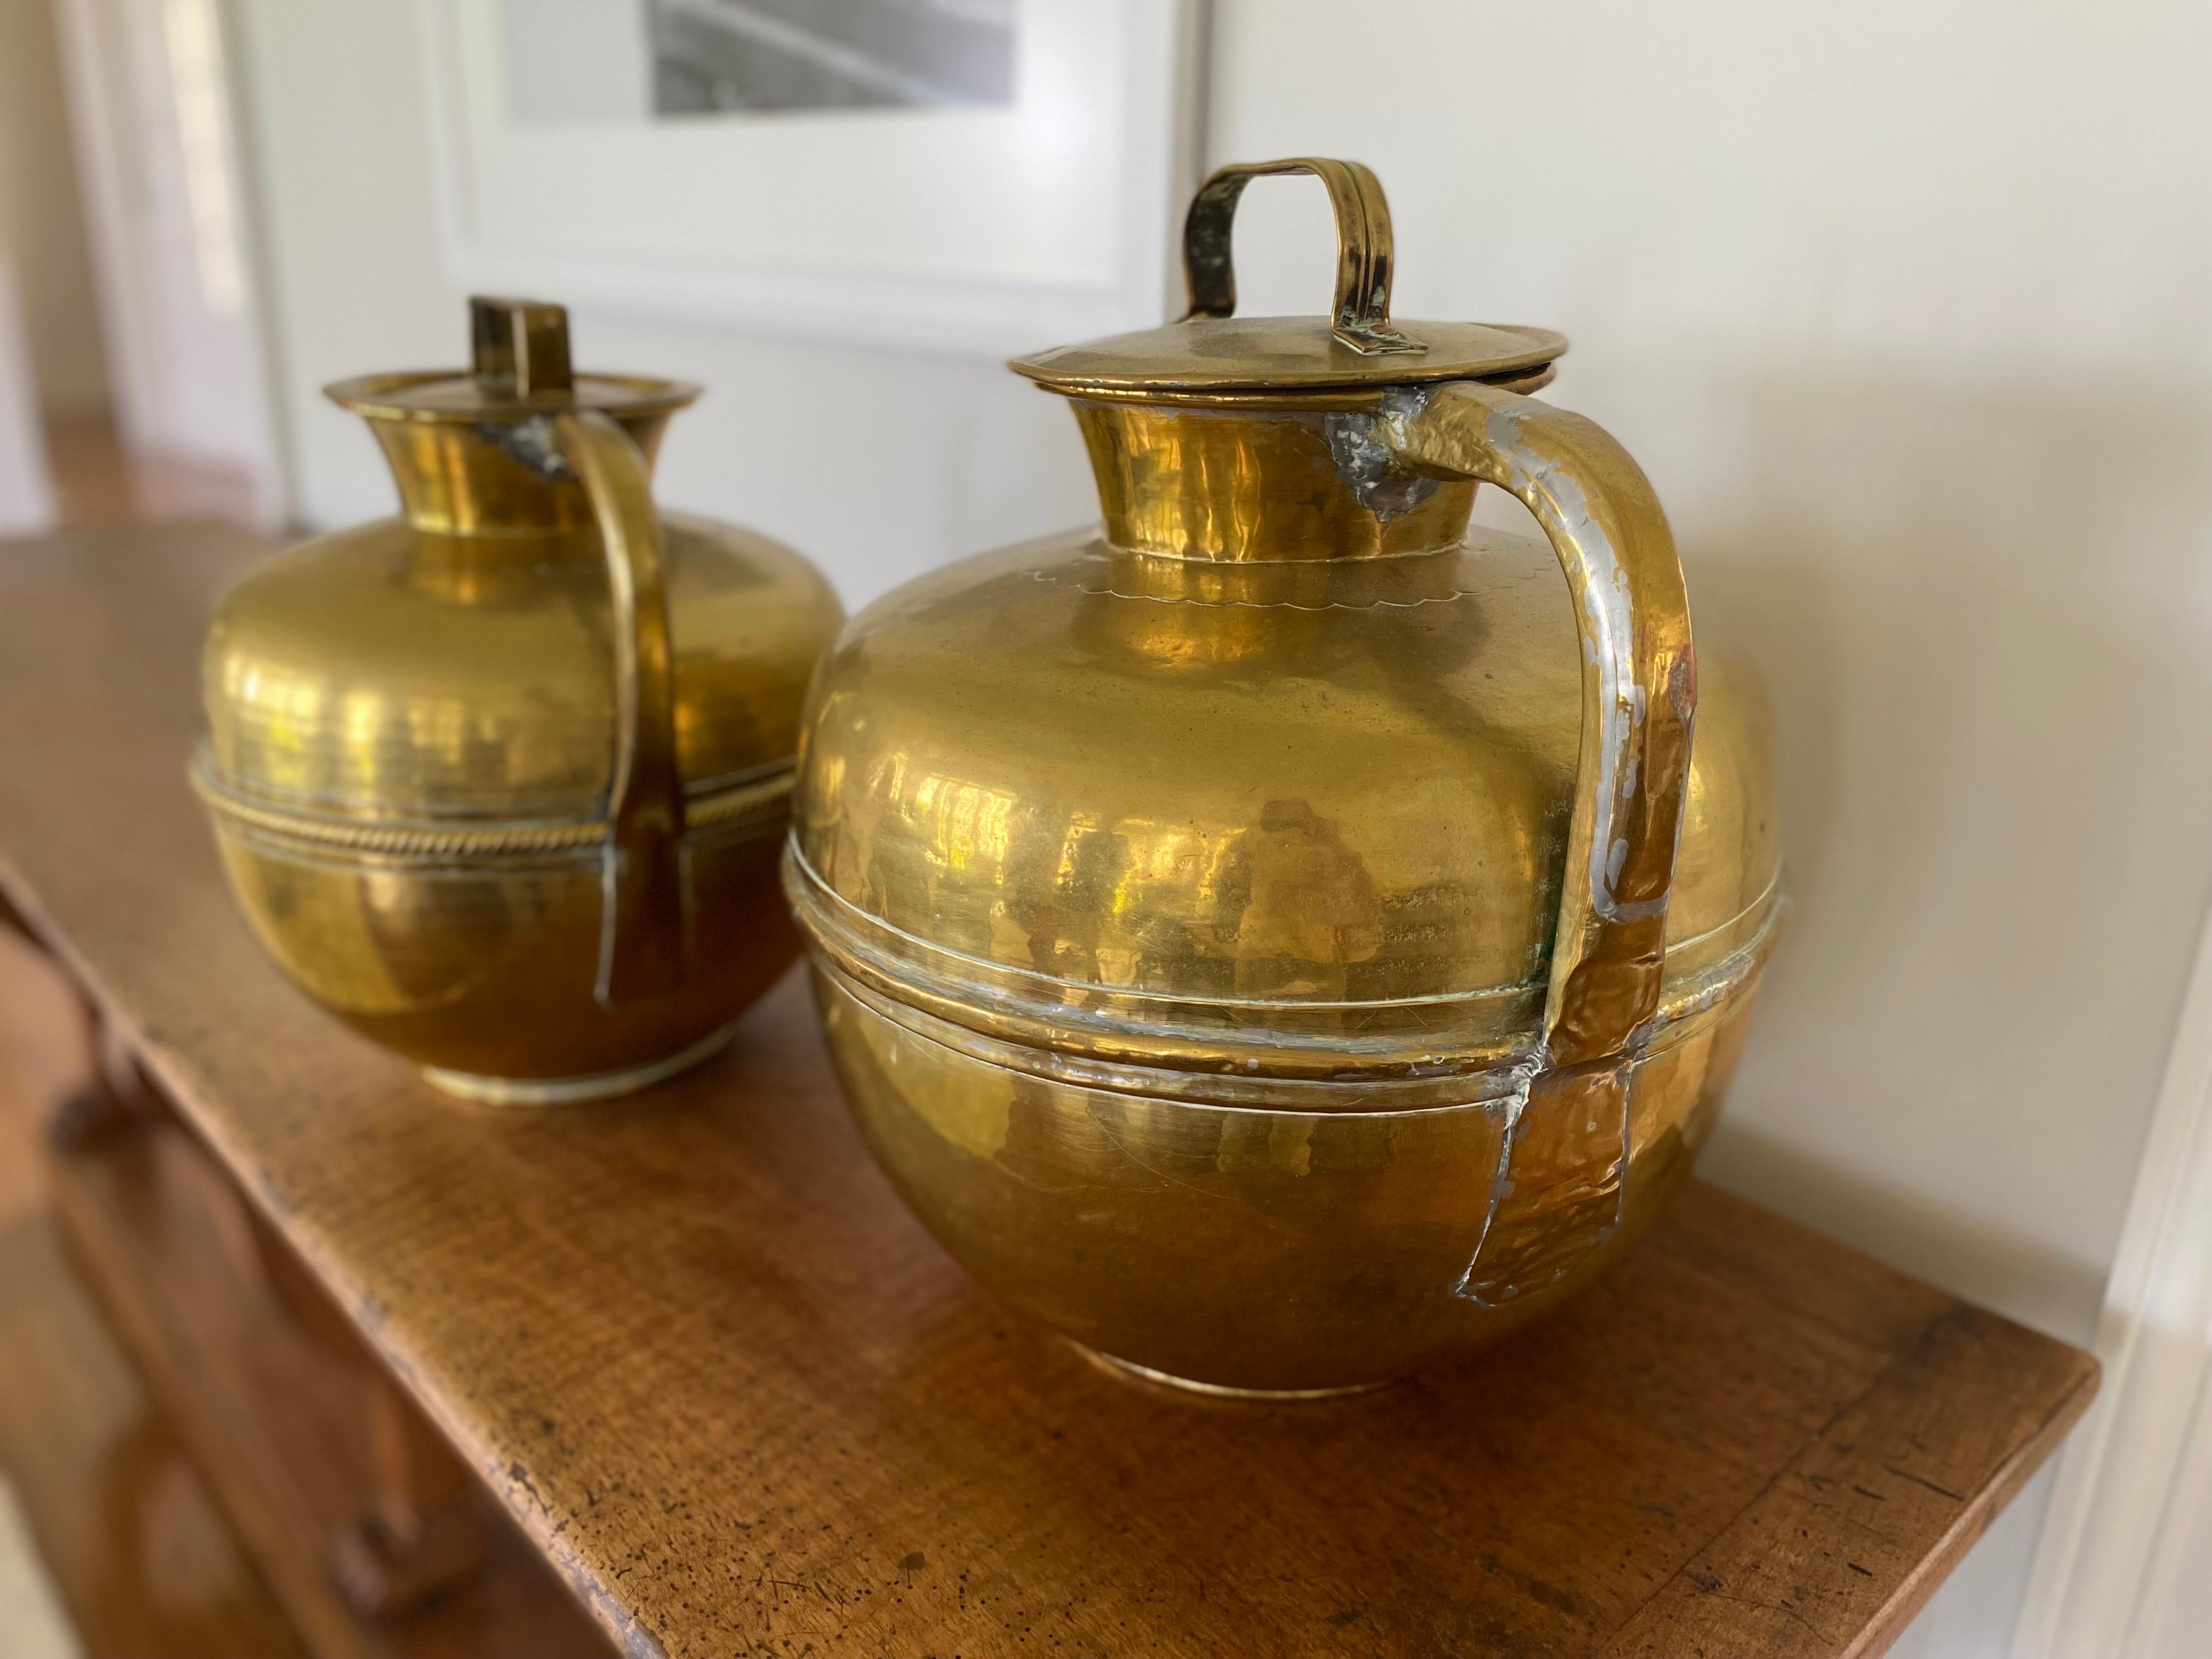 19th century French patinated brass milk jars with top from Rouen. Beautiful patinated brass with tops and handle.
Lg size: 14.5